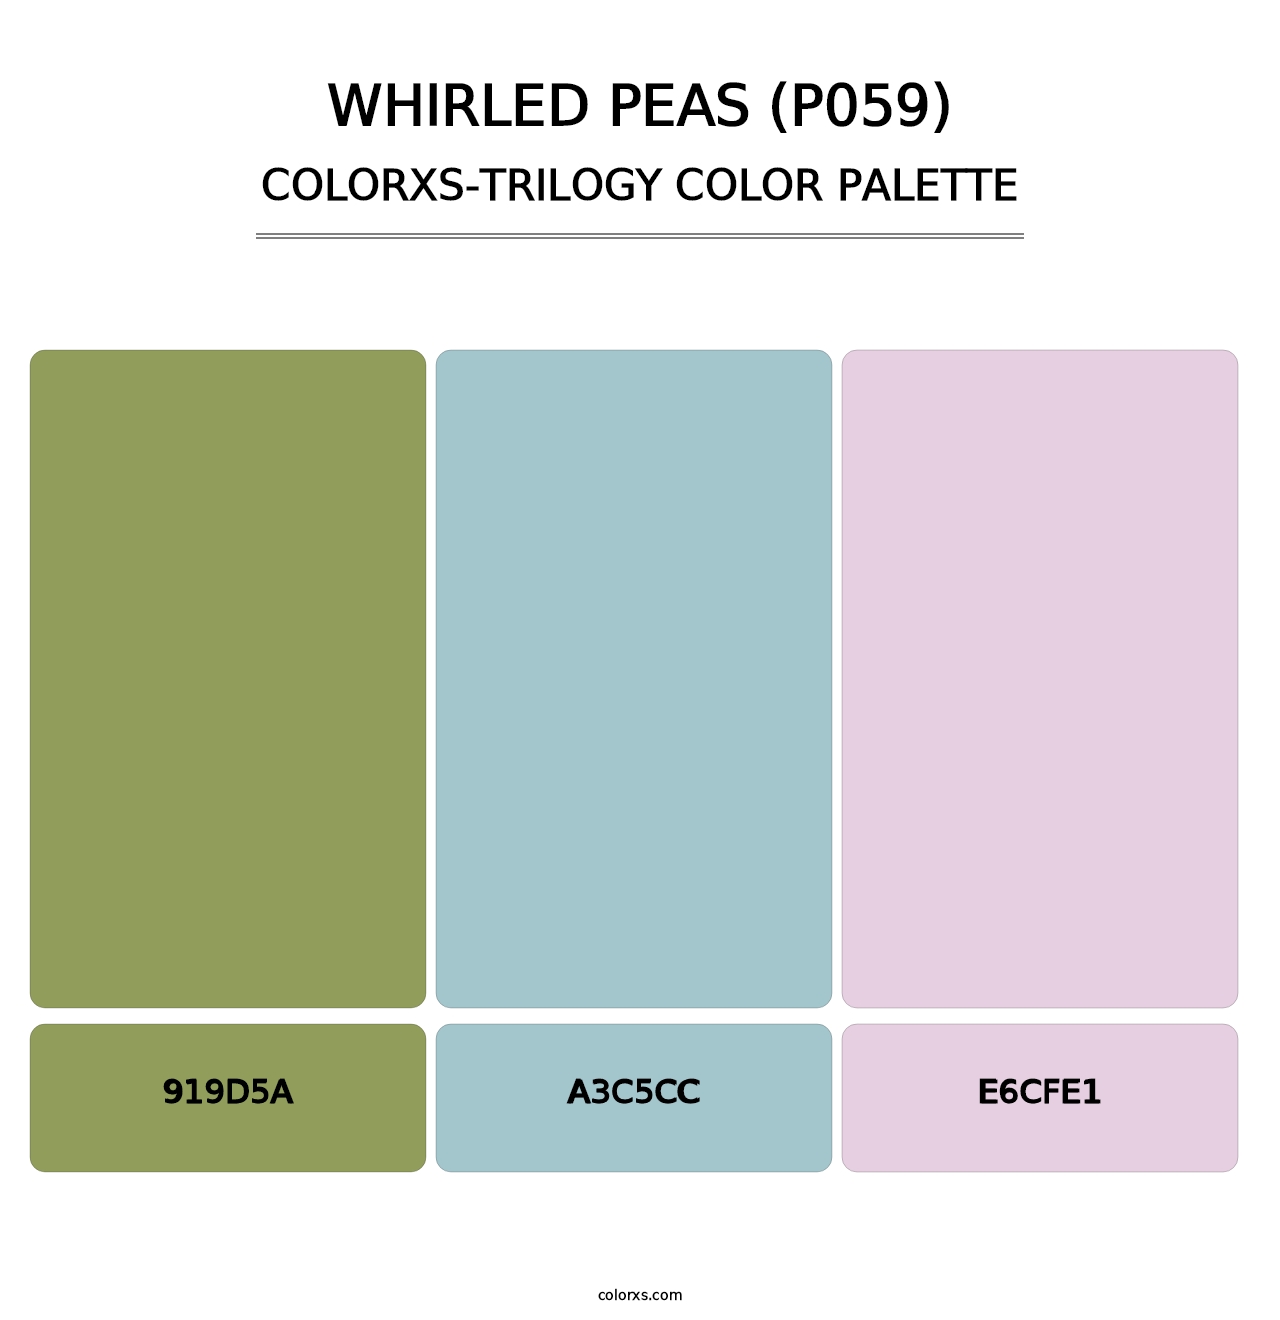 Whirled Peas (P059) - Colorxs Trilogy Palette